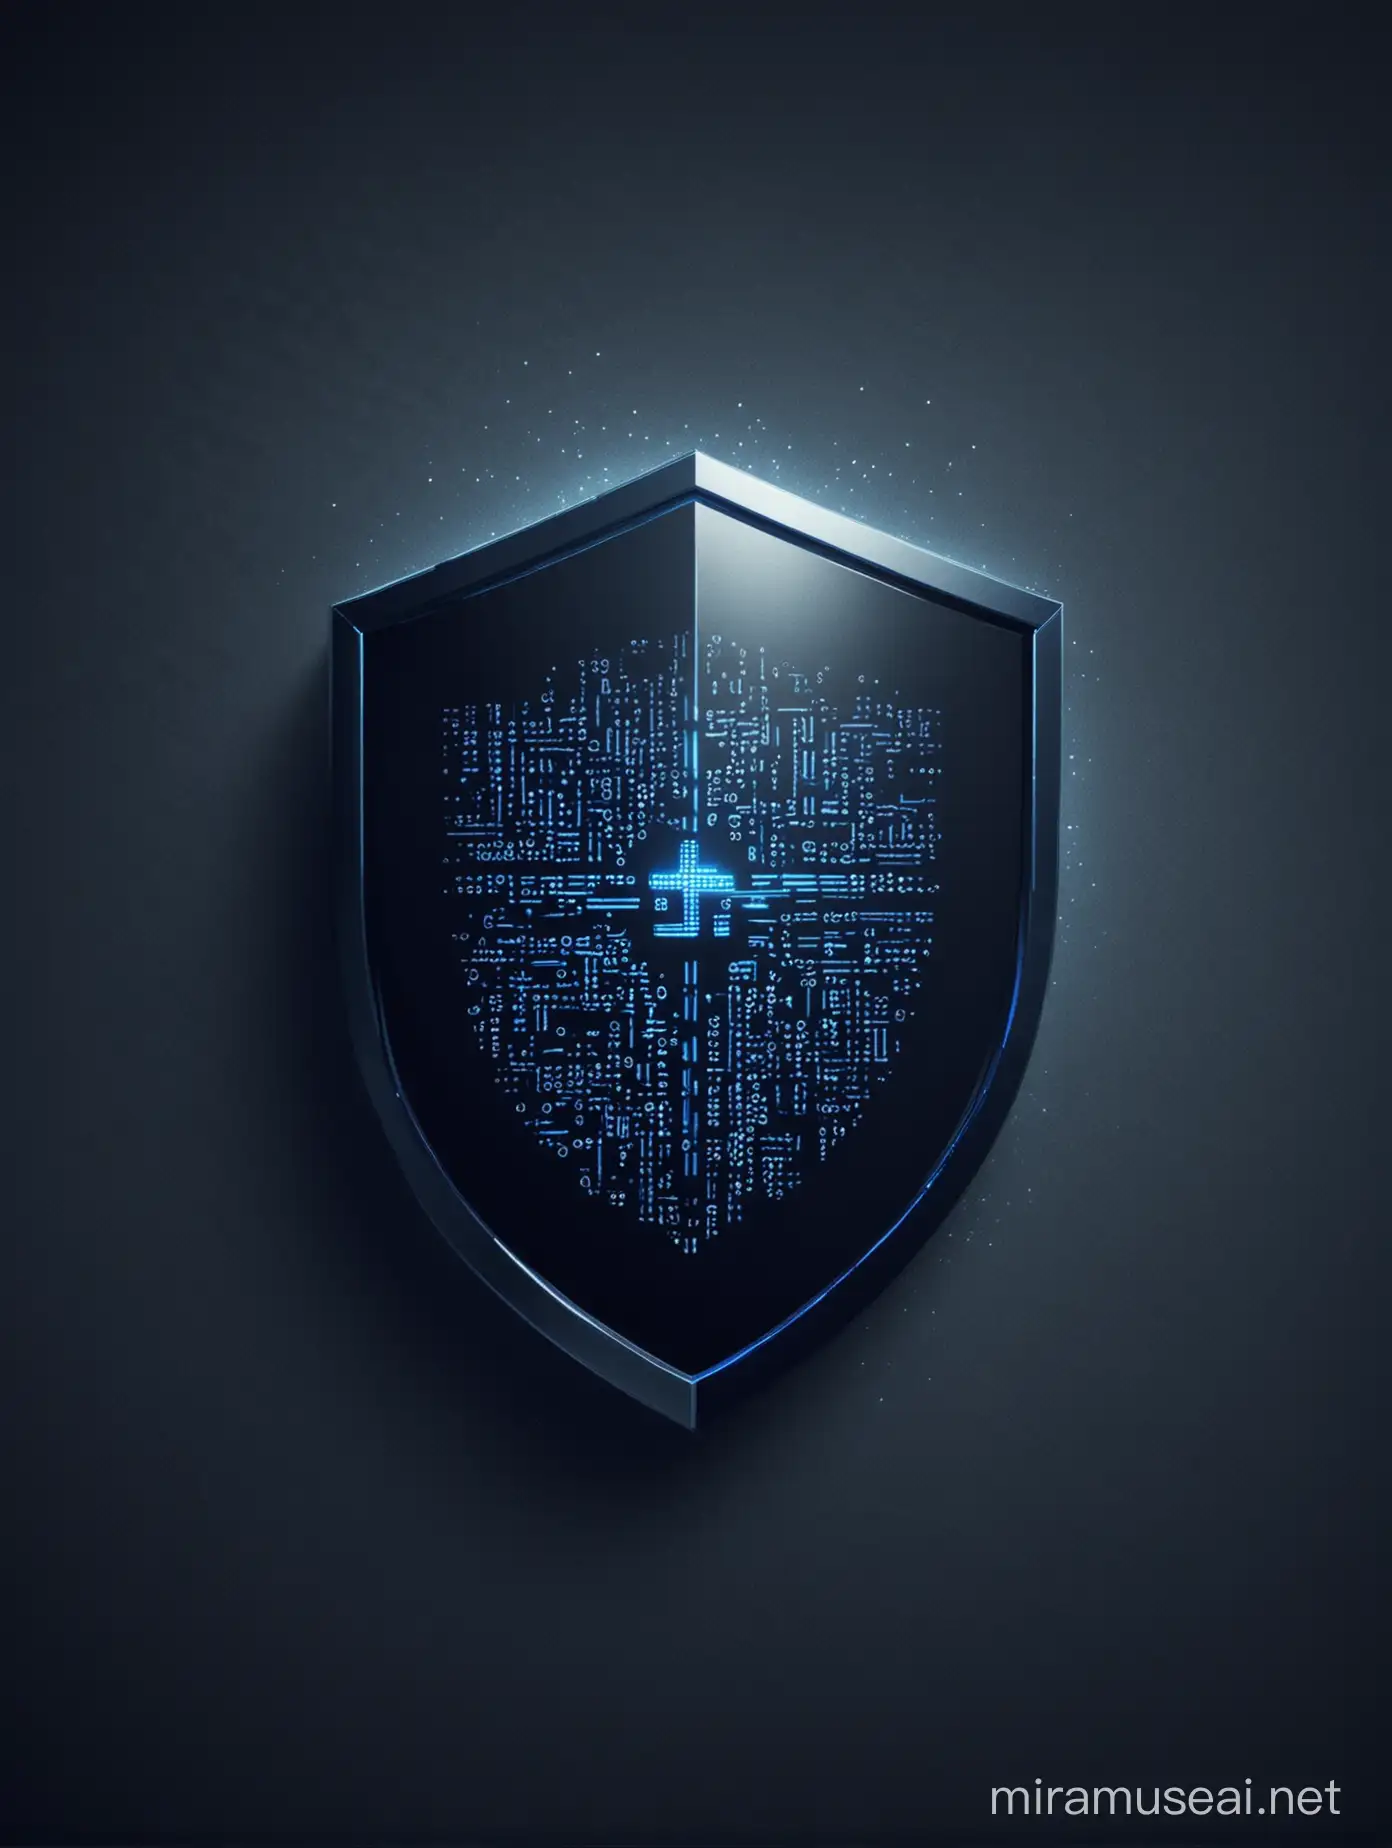 make a logo for cybersecurity company the logo should be an elongated shield of dark blue color, with an ellipse running around it, which should look like a blue matrix code